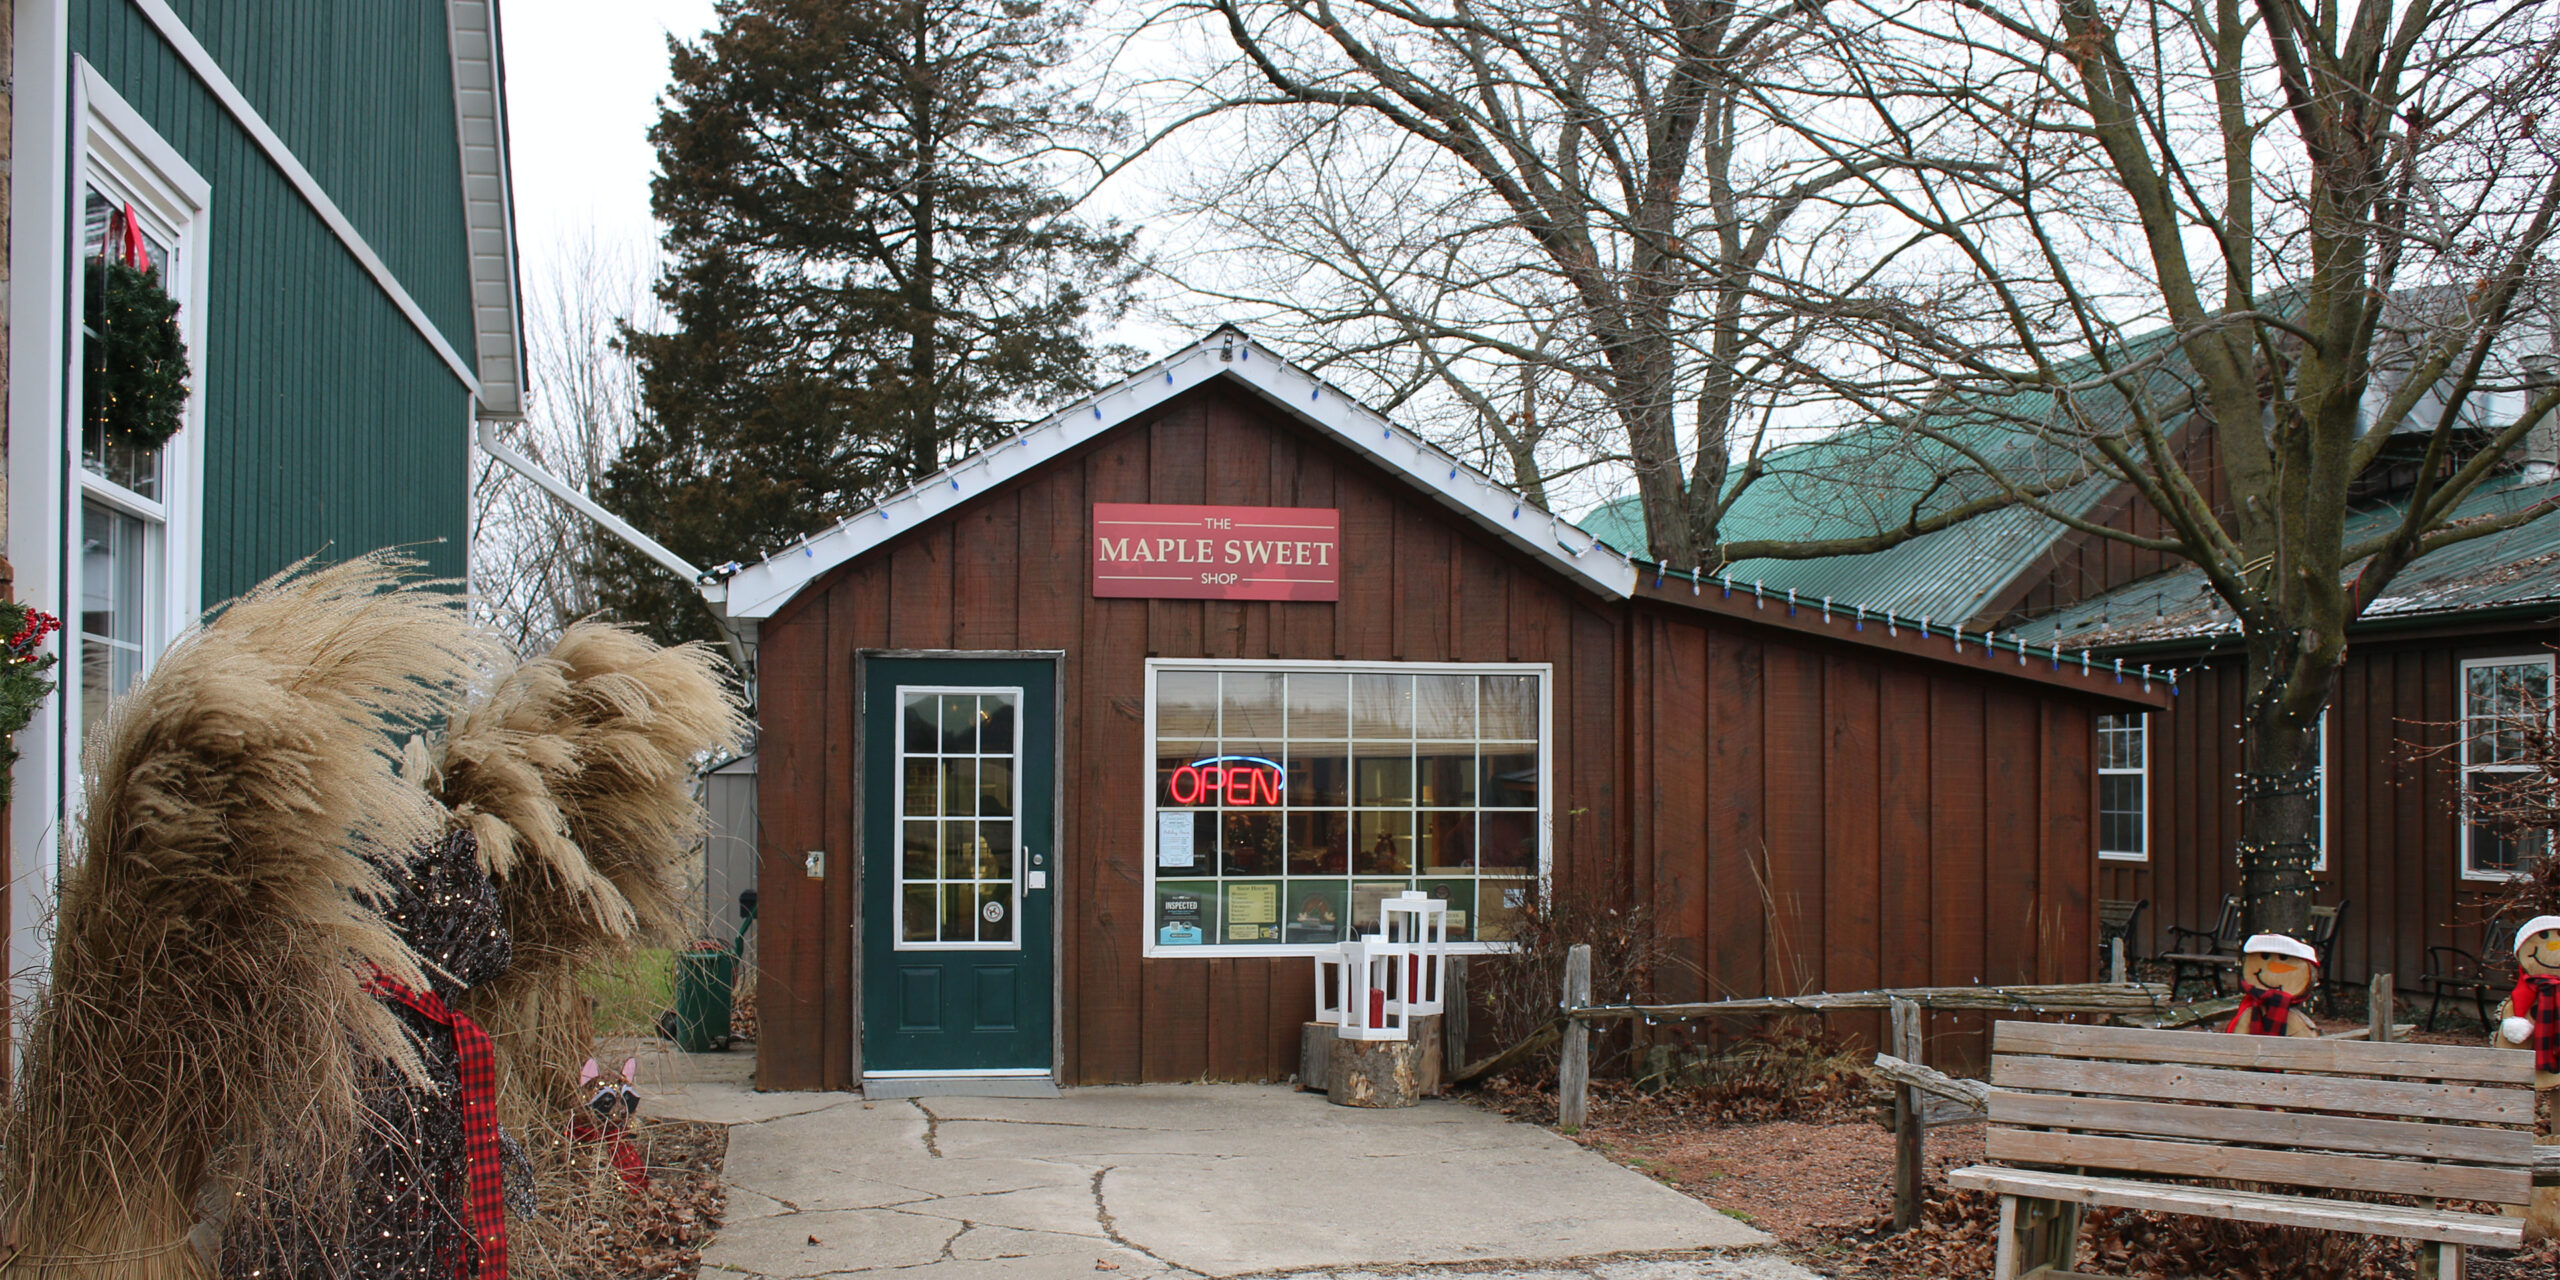 White Meadows Farms offers a variety of maple-inspired treats in their storefront.